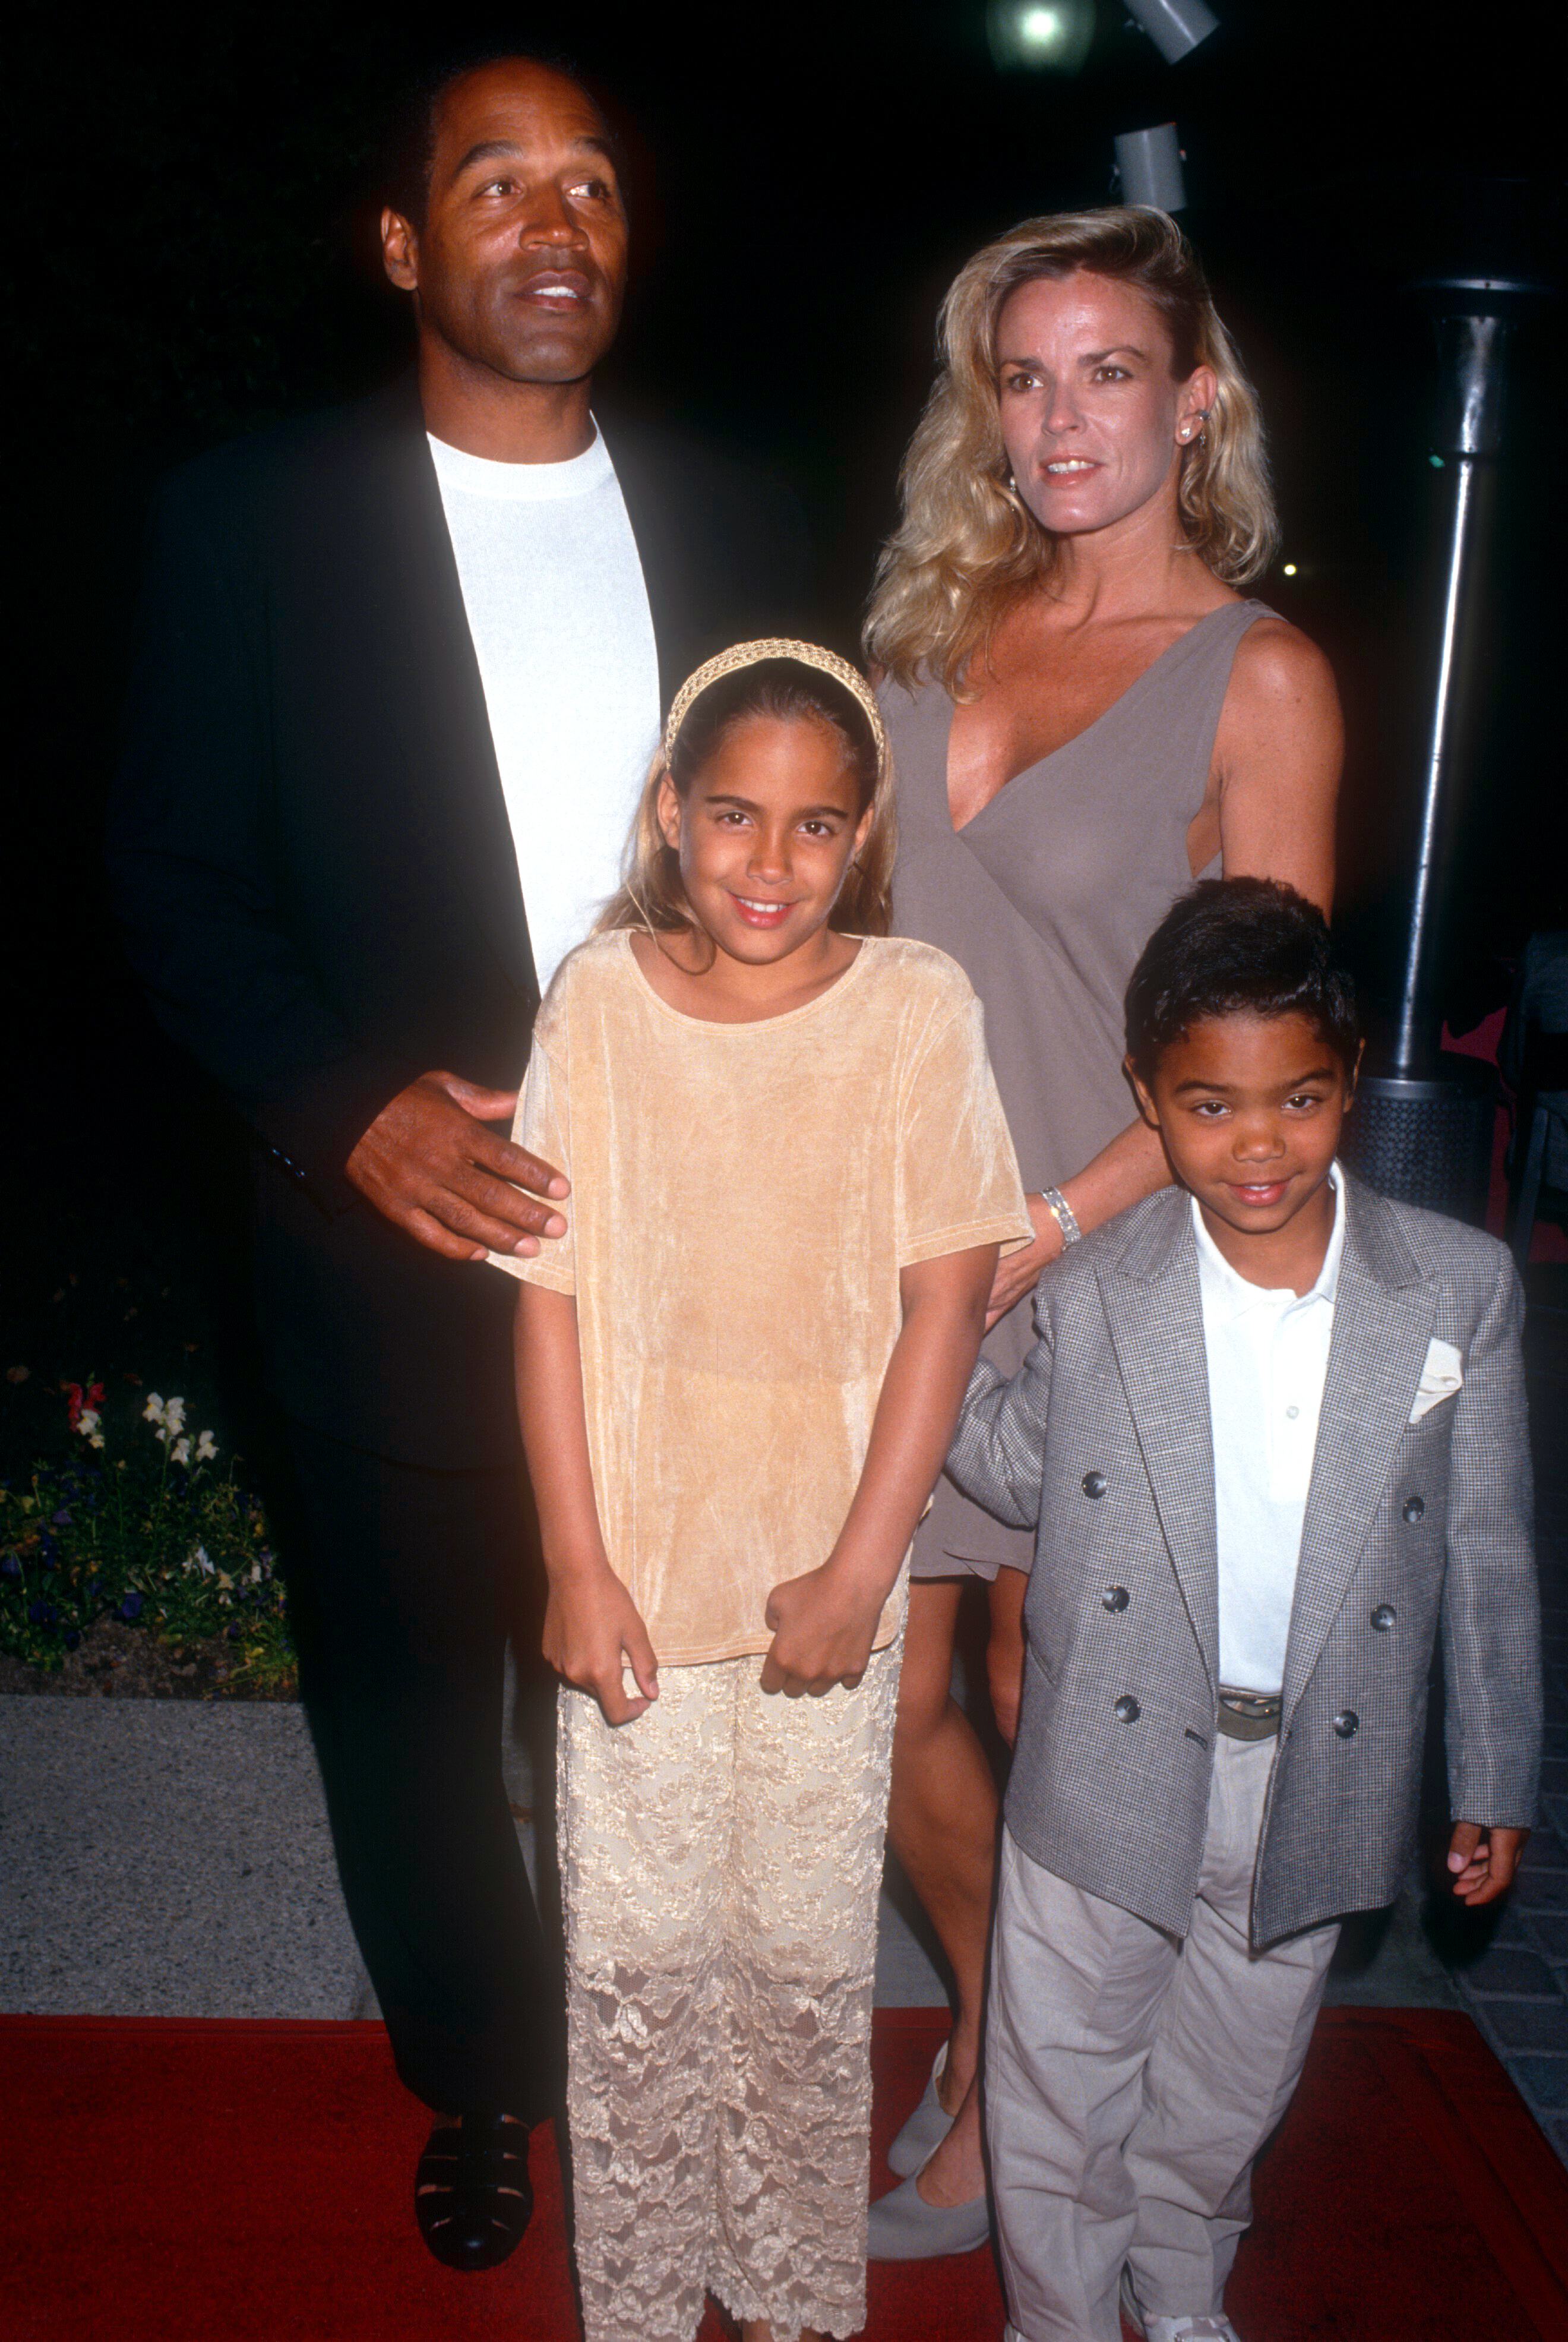 O.J. Simpson and Nicole Brown Simpson walk the red carpet with their children, Sydney and Justin, as they attend the "Naked Gun 33 1/3: The Final Insult" premiere on March 16, 1994, at the Paramount Studios in Hollywood, California. | Source: Getty Images